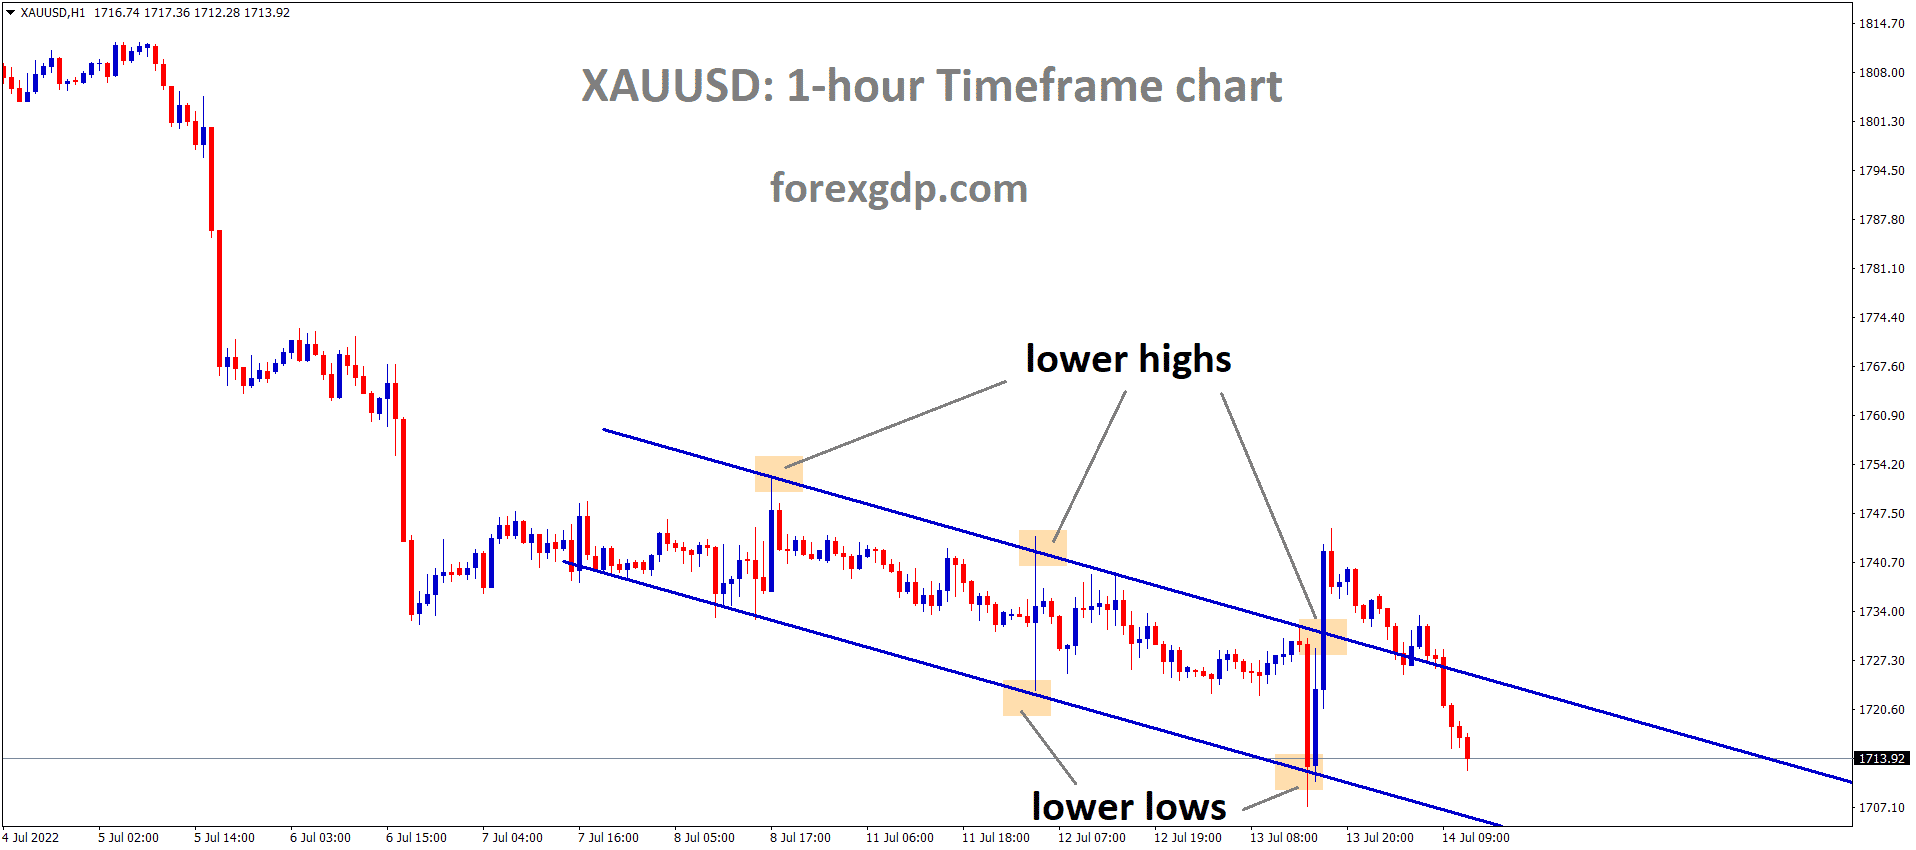 XAUUSD Gold price is moving in the Descending channel and the market has fallen from the Lower high area of the channel